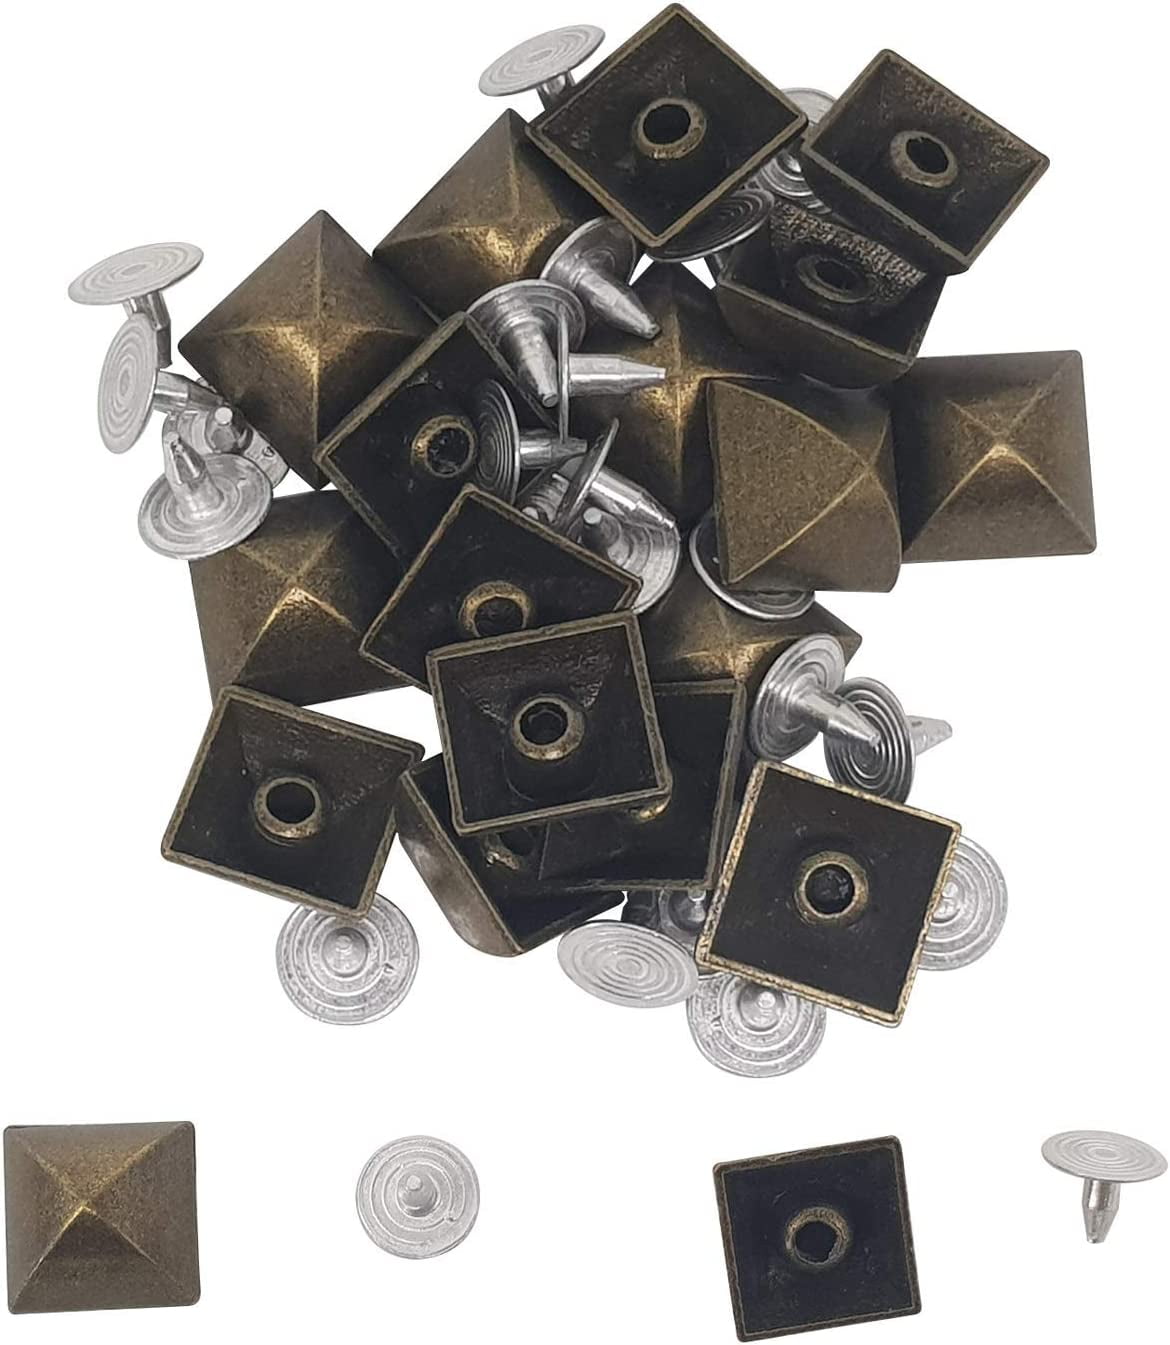 Trimming Shop Square Brass Pyramid Studs with Base Pins Leather Rivets  (8mm, Silver, 50pcs)